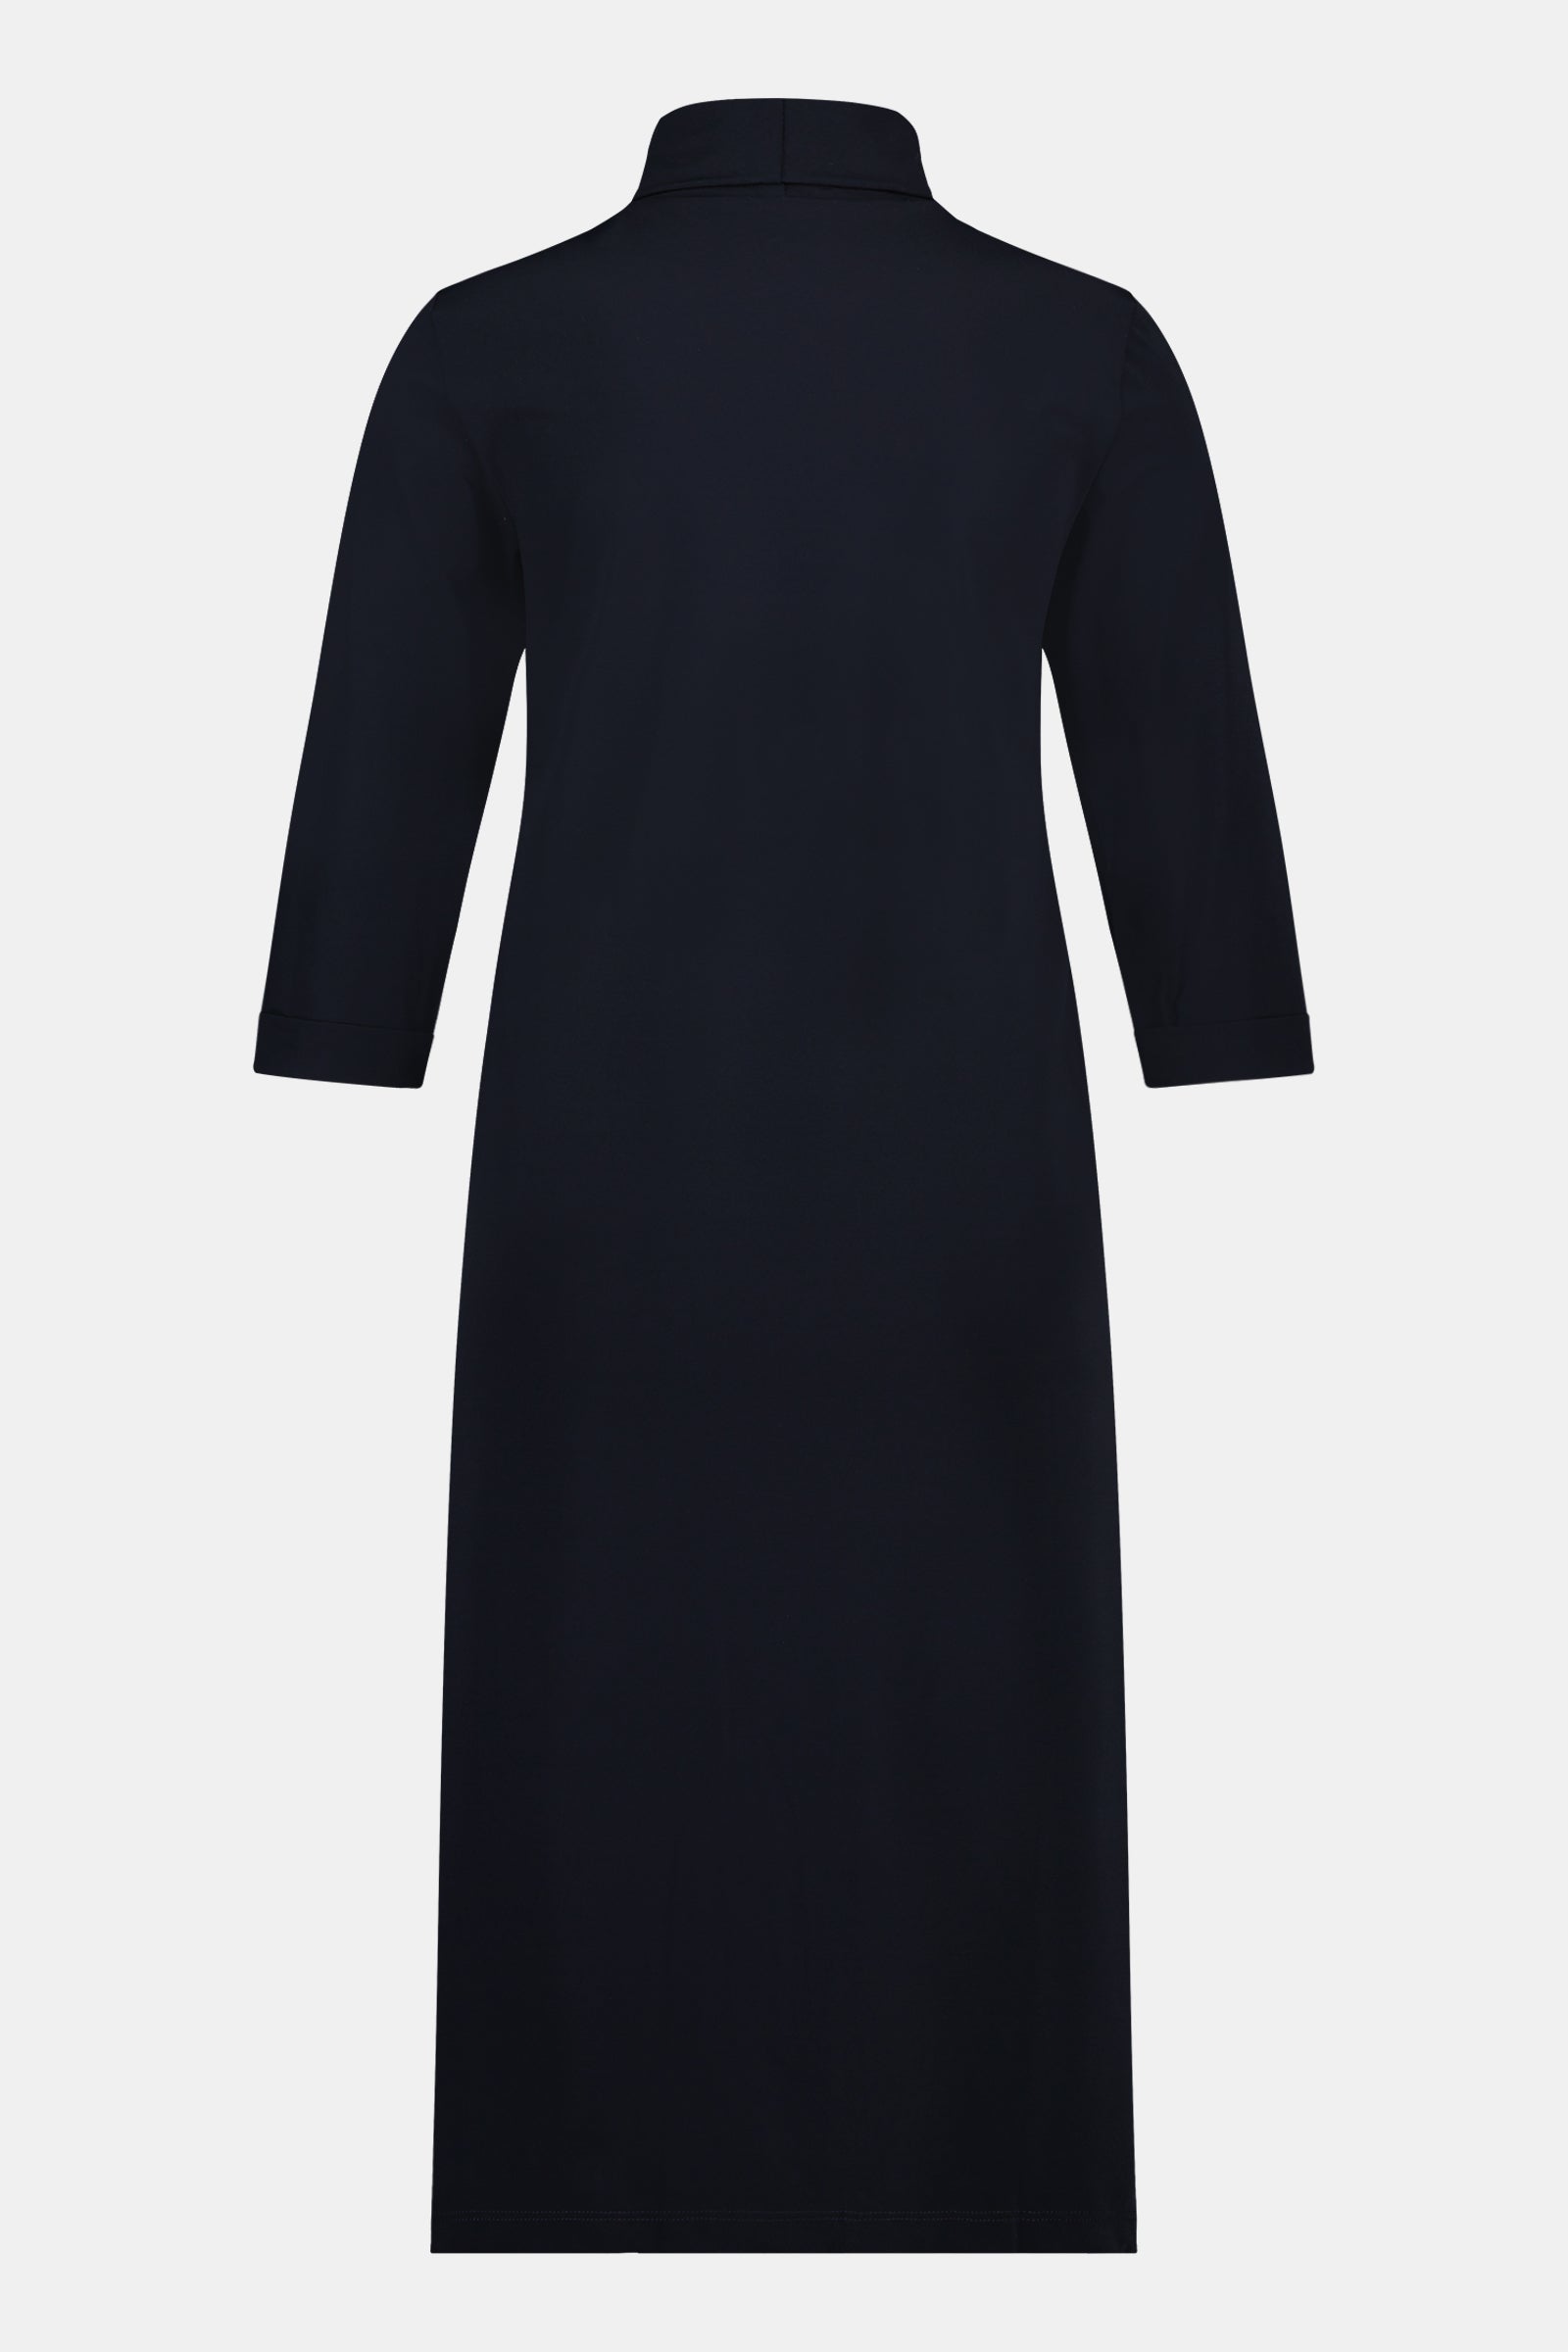 Penn&Ink BESS Classic Navy Cowl Neck Dress with Three-Quarter Sleeves ...